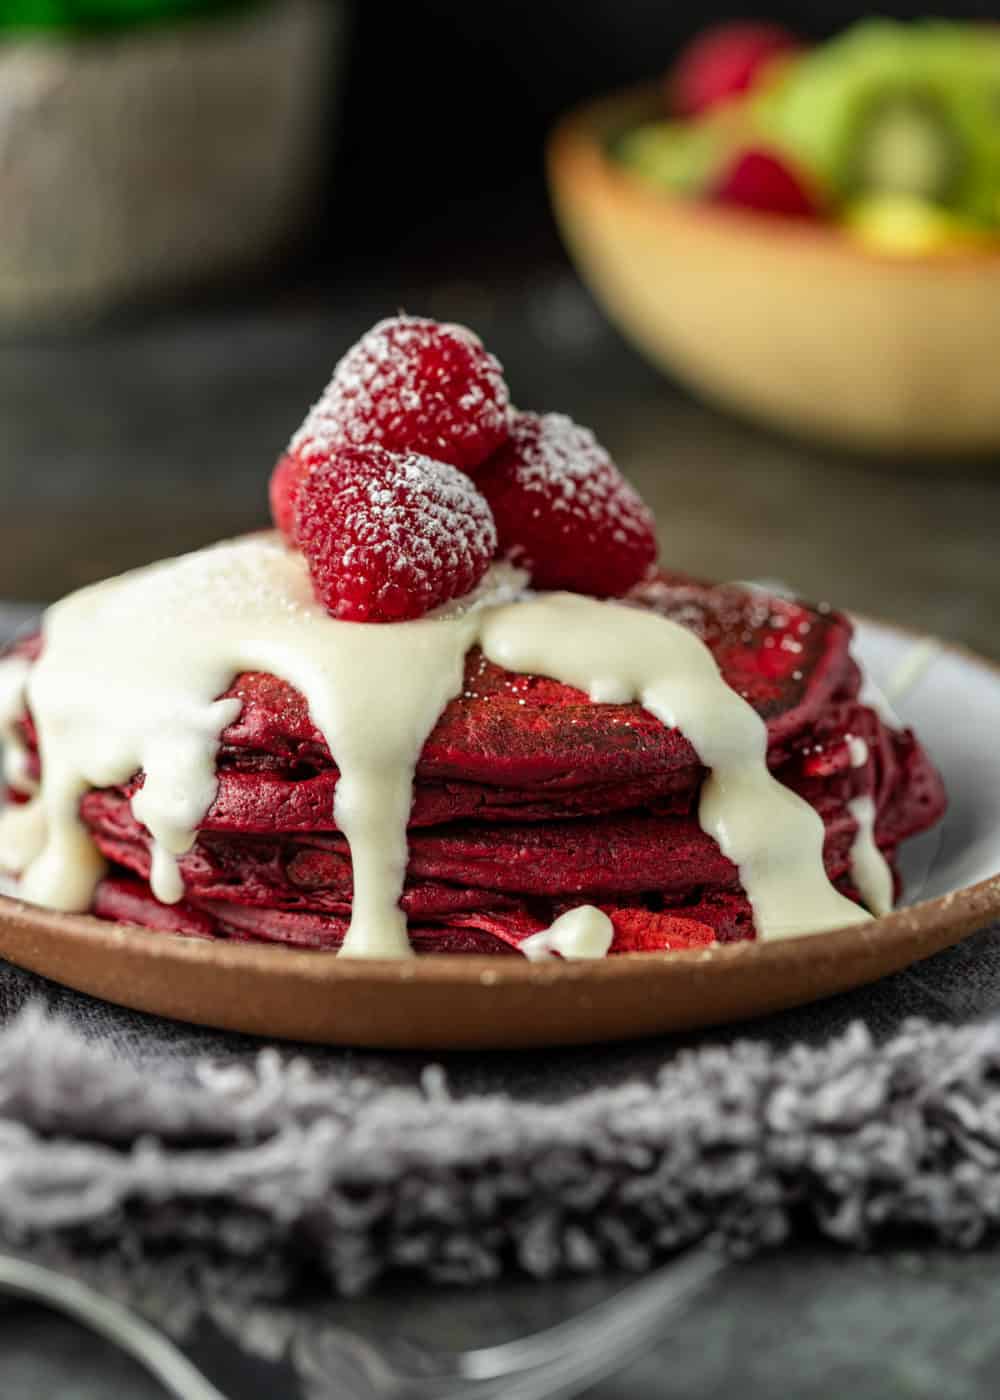 small stack of red pancakes for two topped with sweet sugar glaze and fresh raspberries